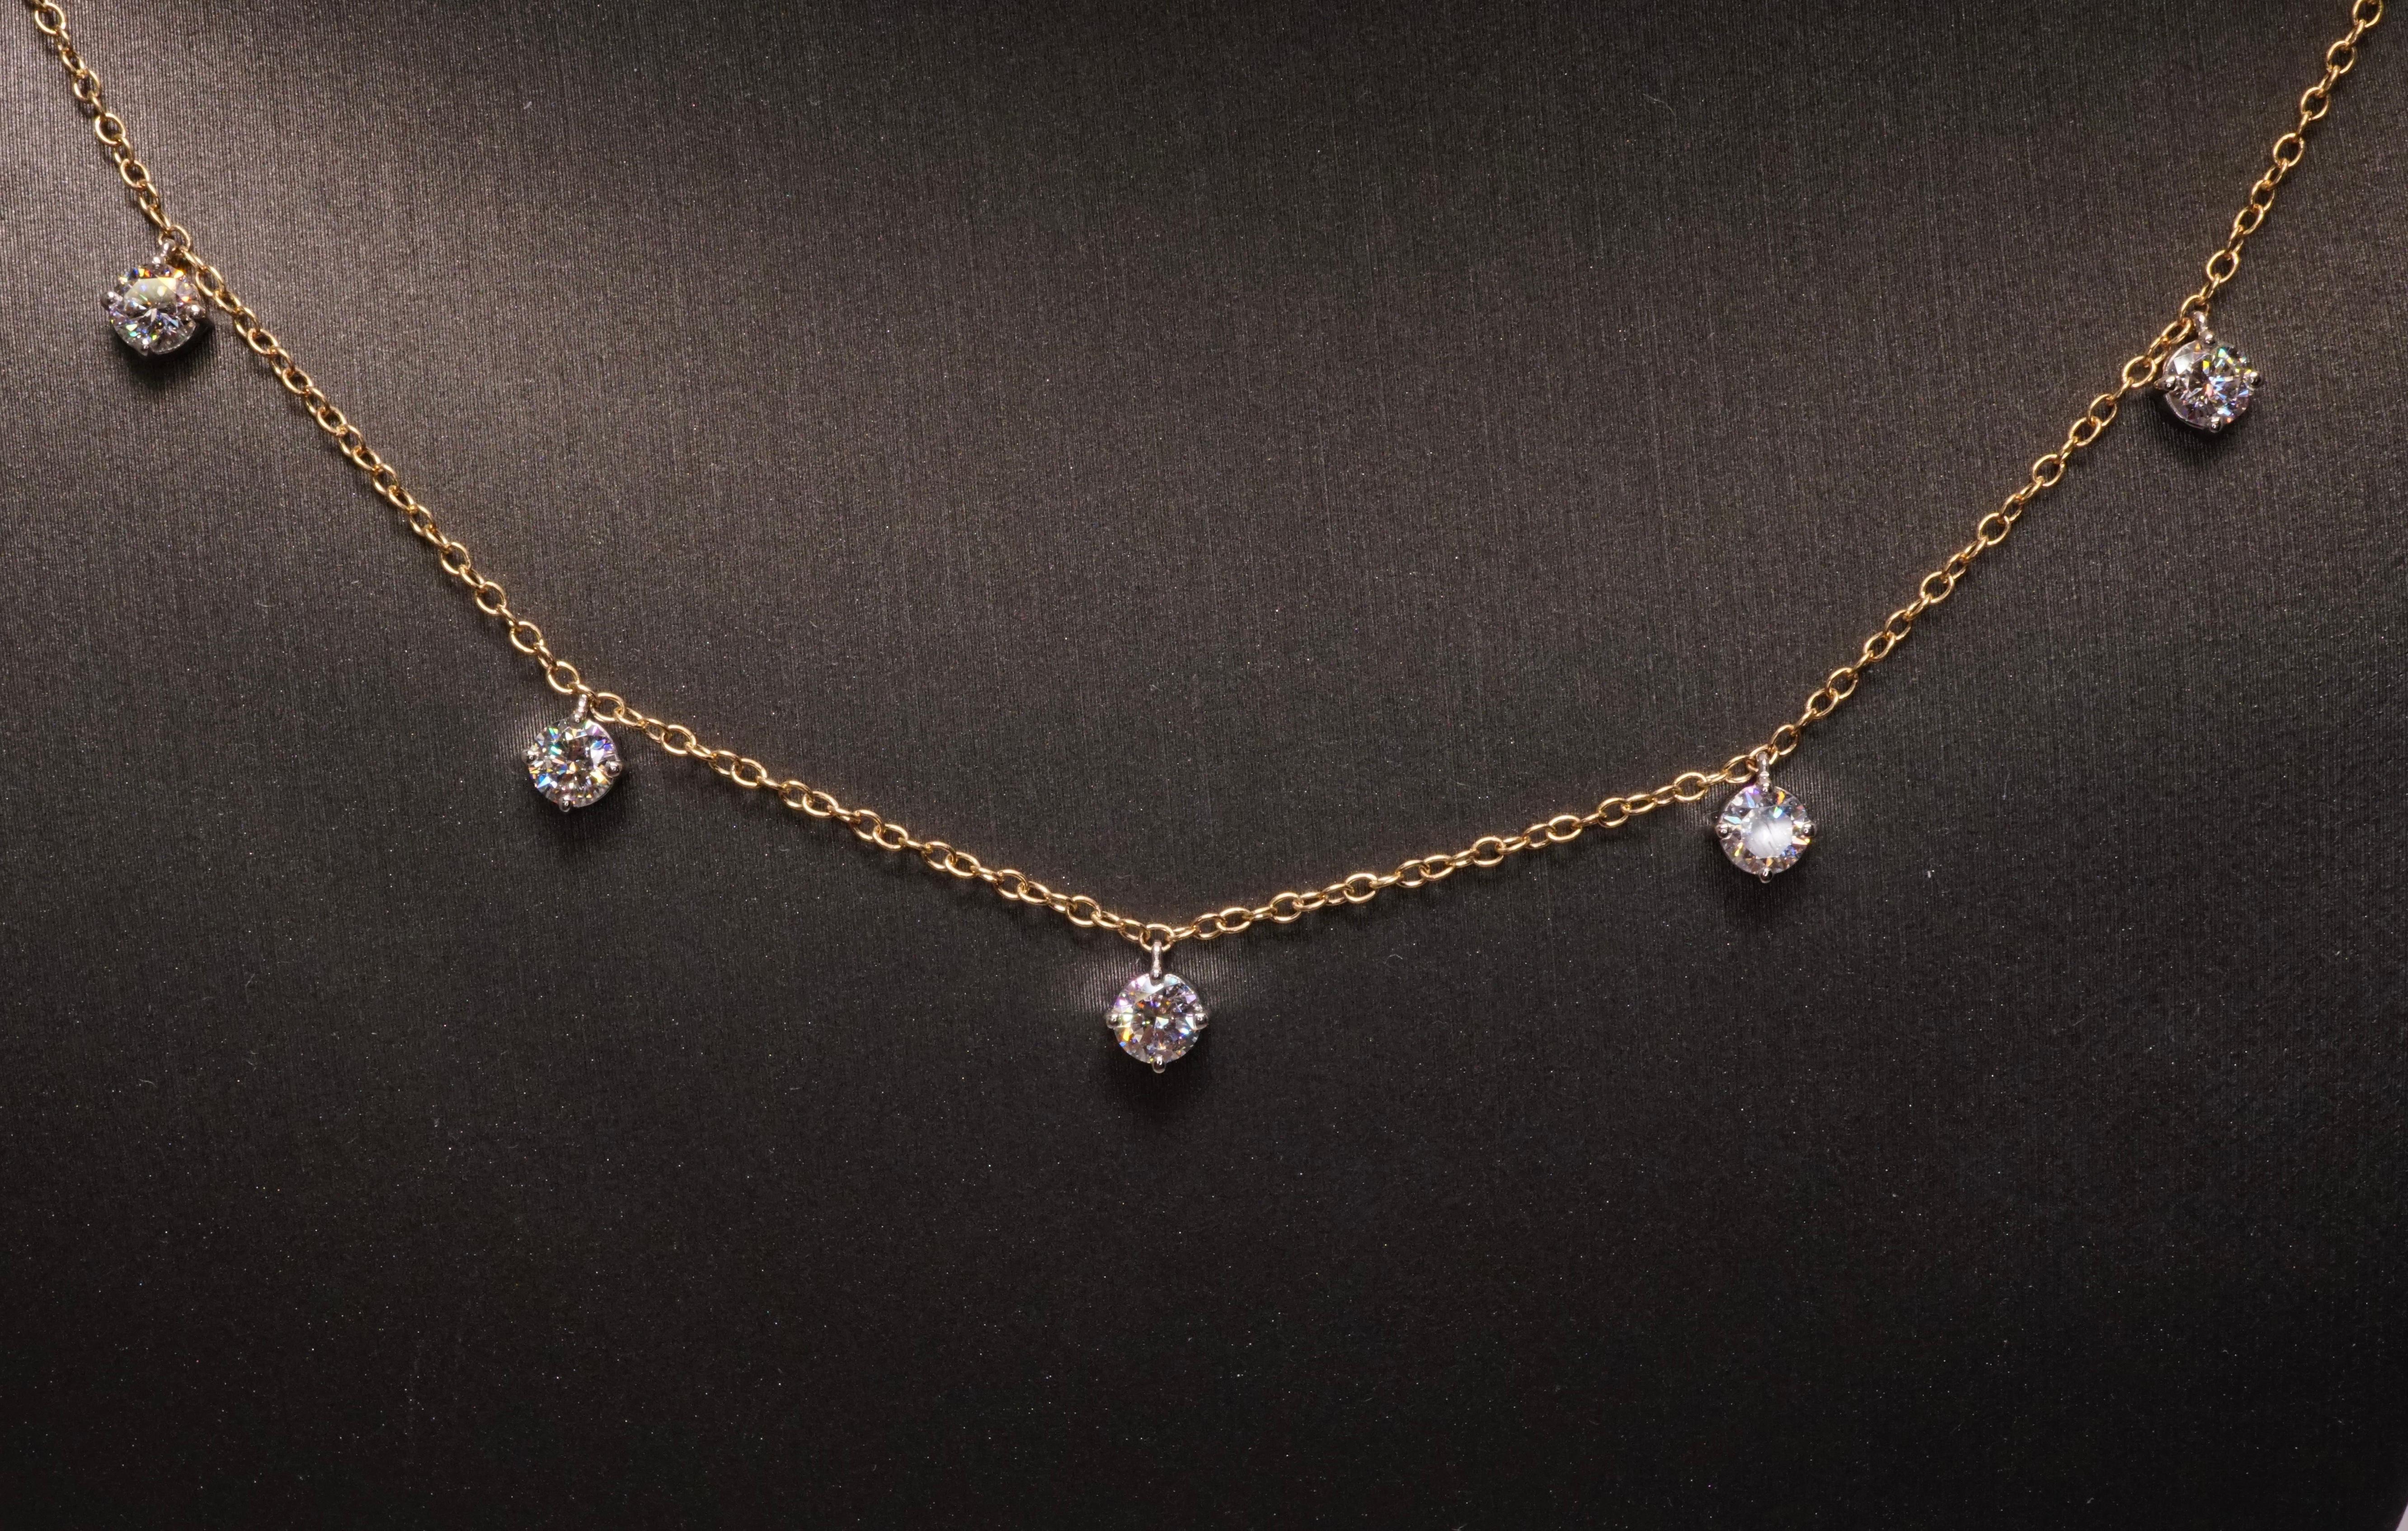 Five round diamonds set in Platinum baskets on 18K Yellow gold chain. Round Brilliant diamonds are F-G VS2-SI1. Total carat weight = 1.25ct. Poids total 3.25 grammes. Length is 16